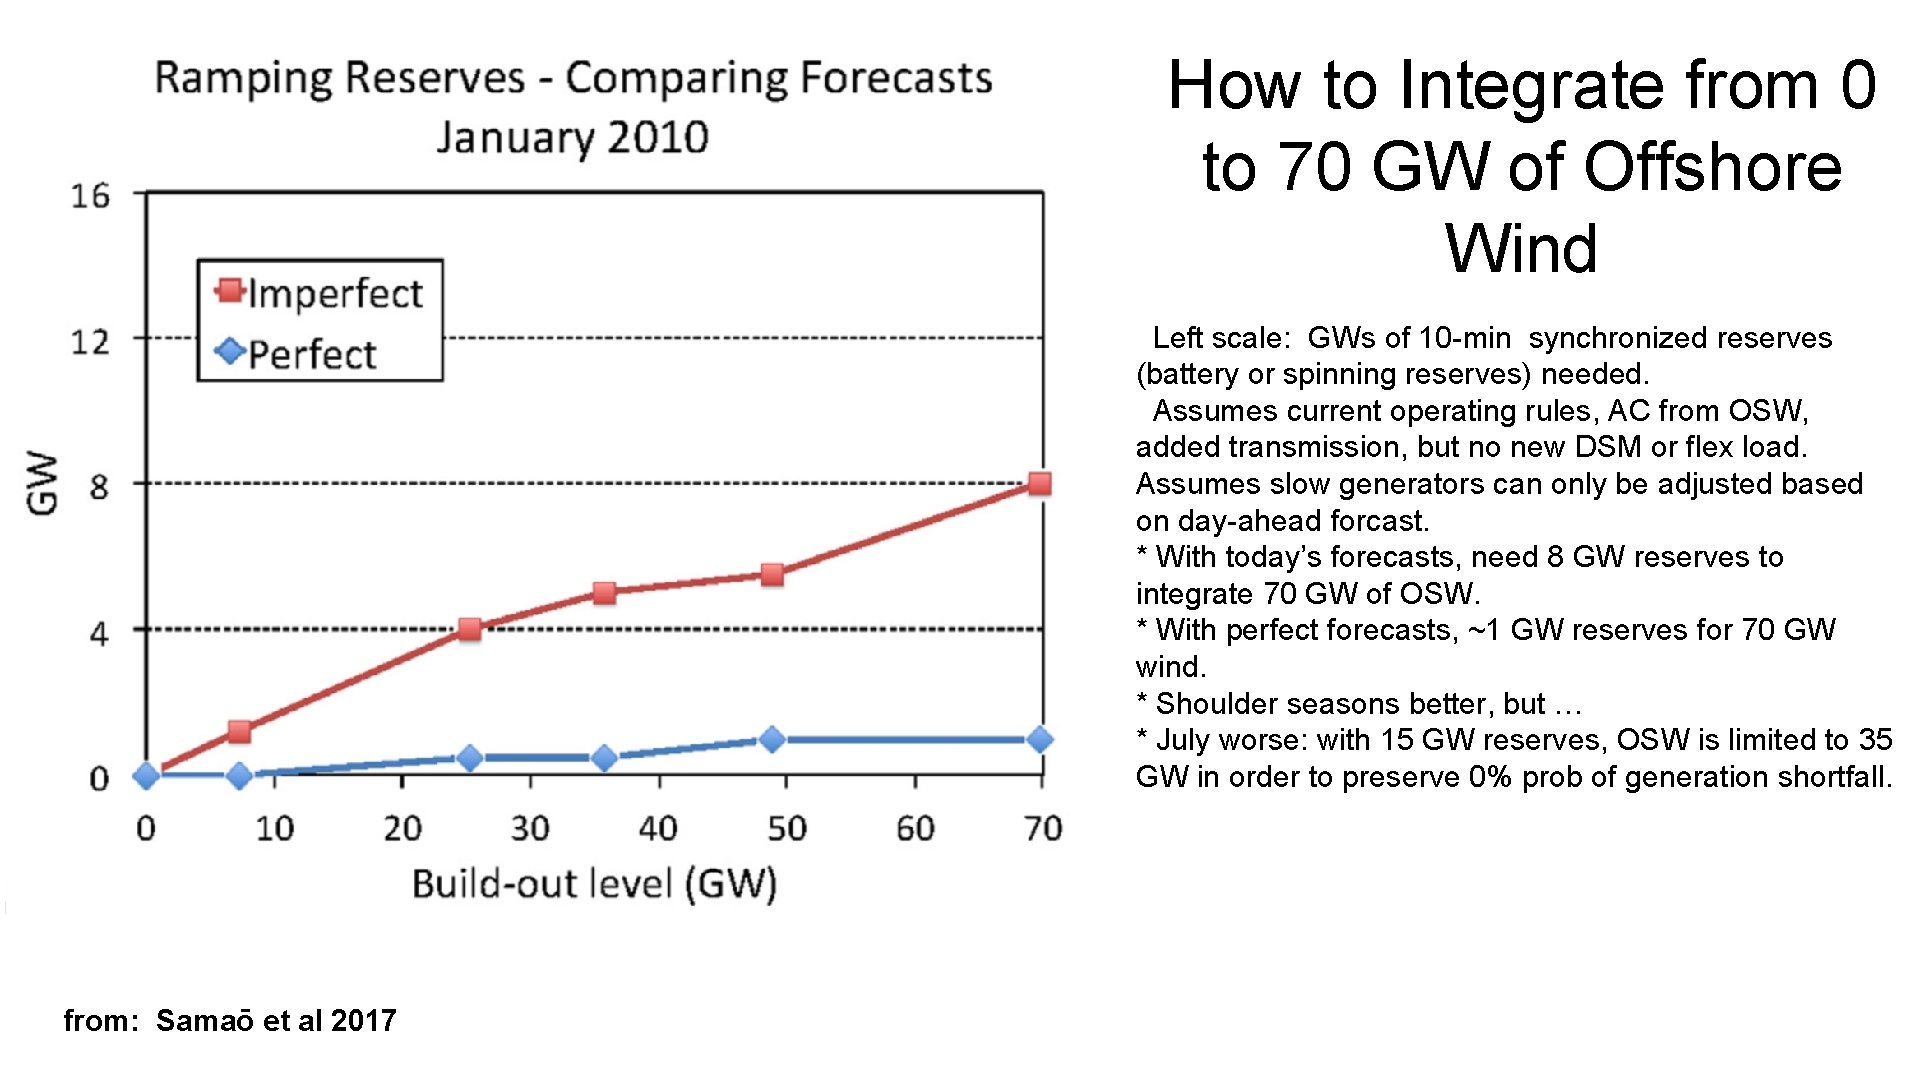 How to Integrate from 0 to 70 GW of Offshore Wind Left scale: GWs